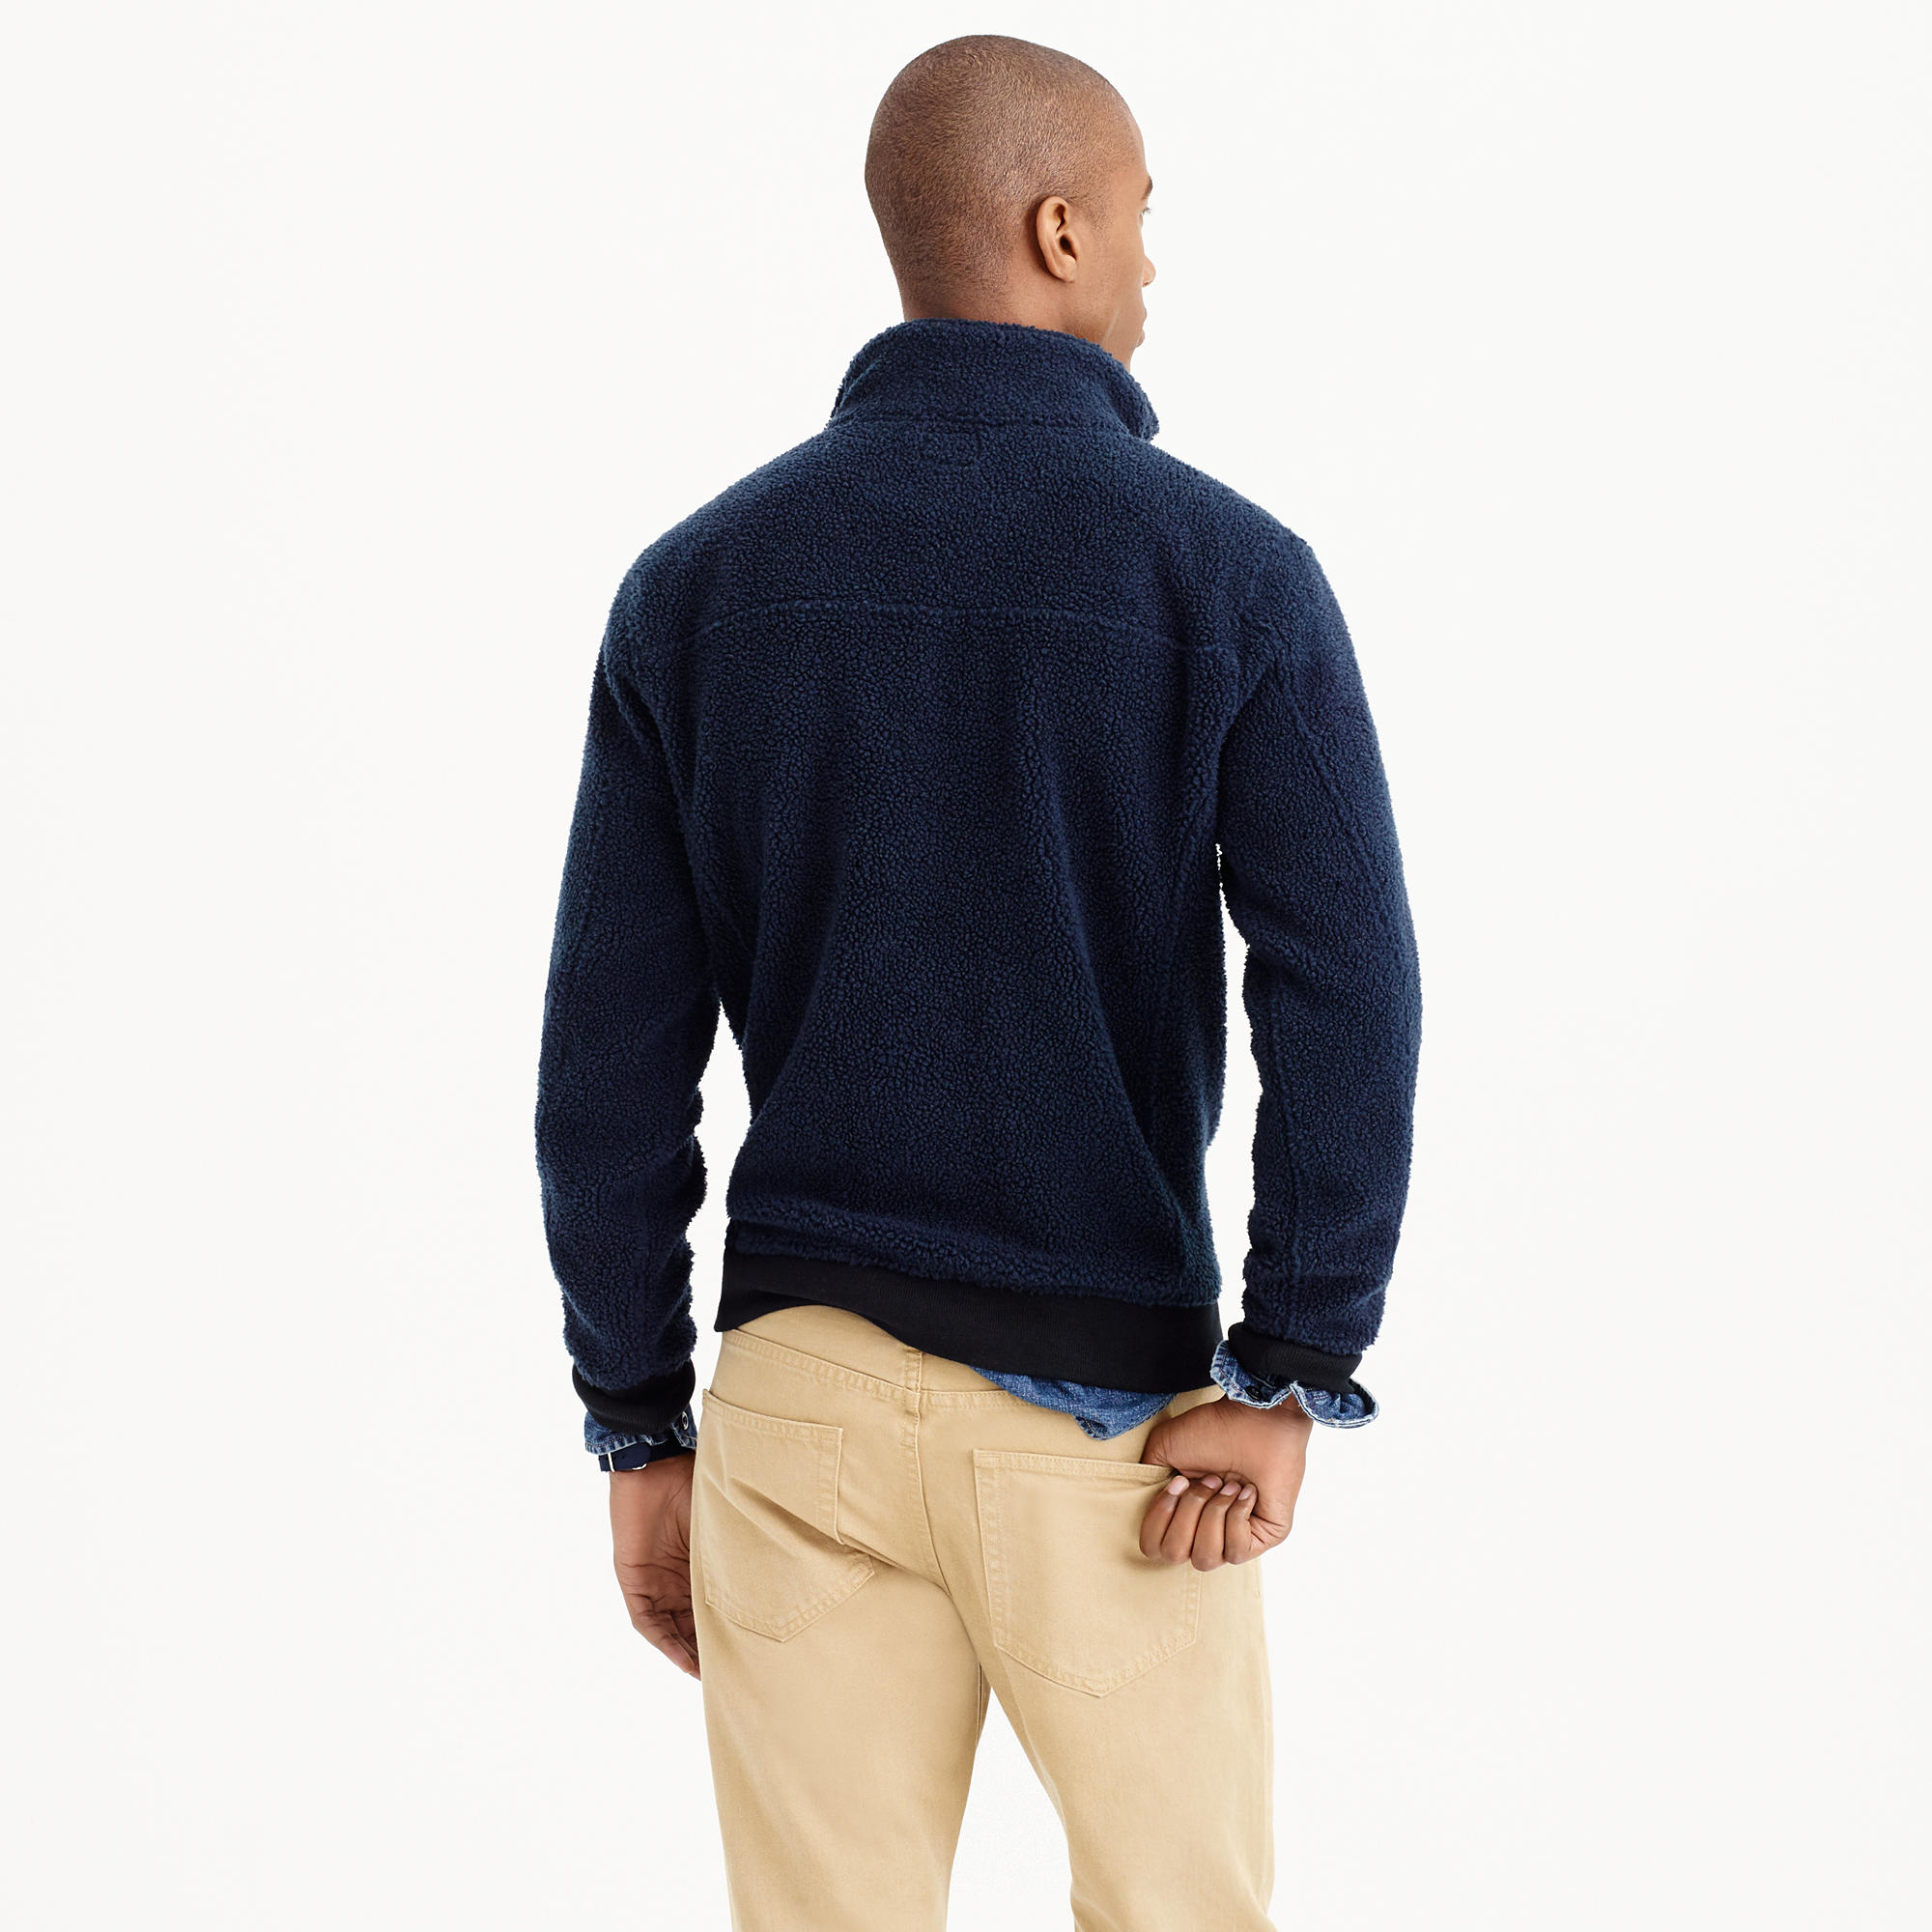 J.Crew Grizzly Fleece Pullover Jacket in Navy (Blue) for Men - Lyst